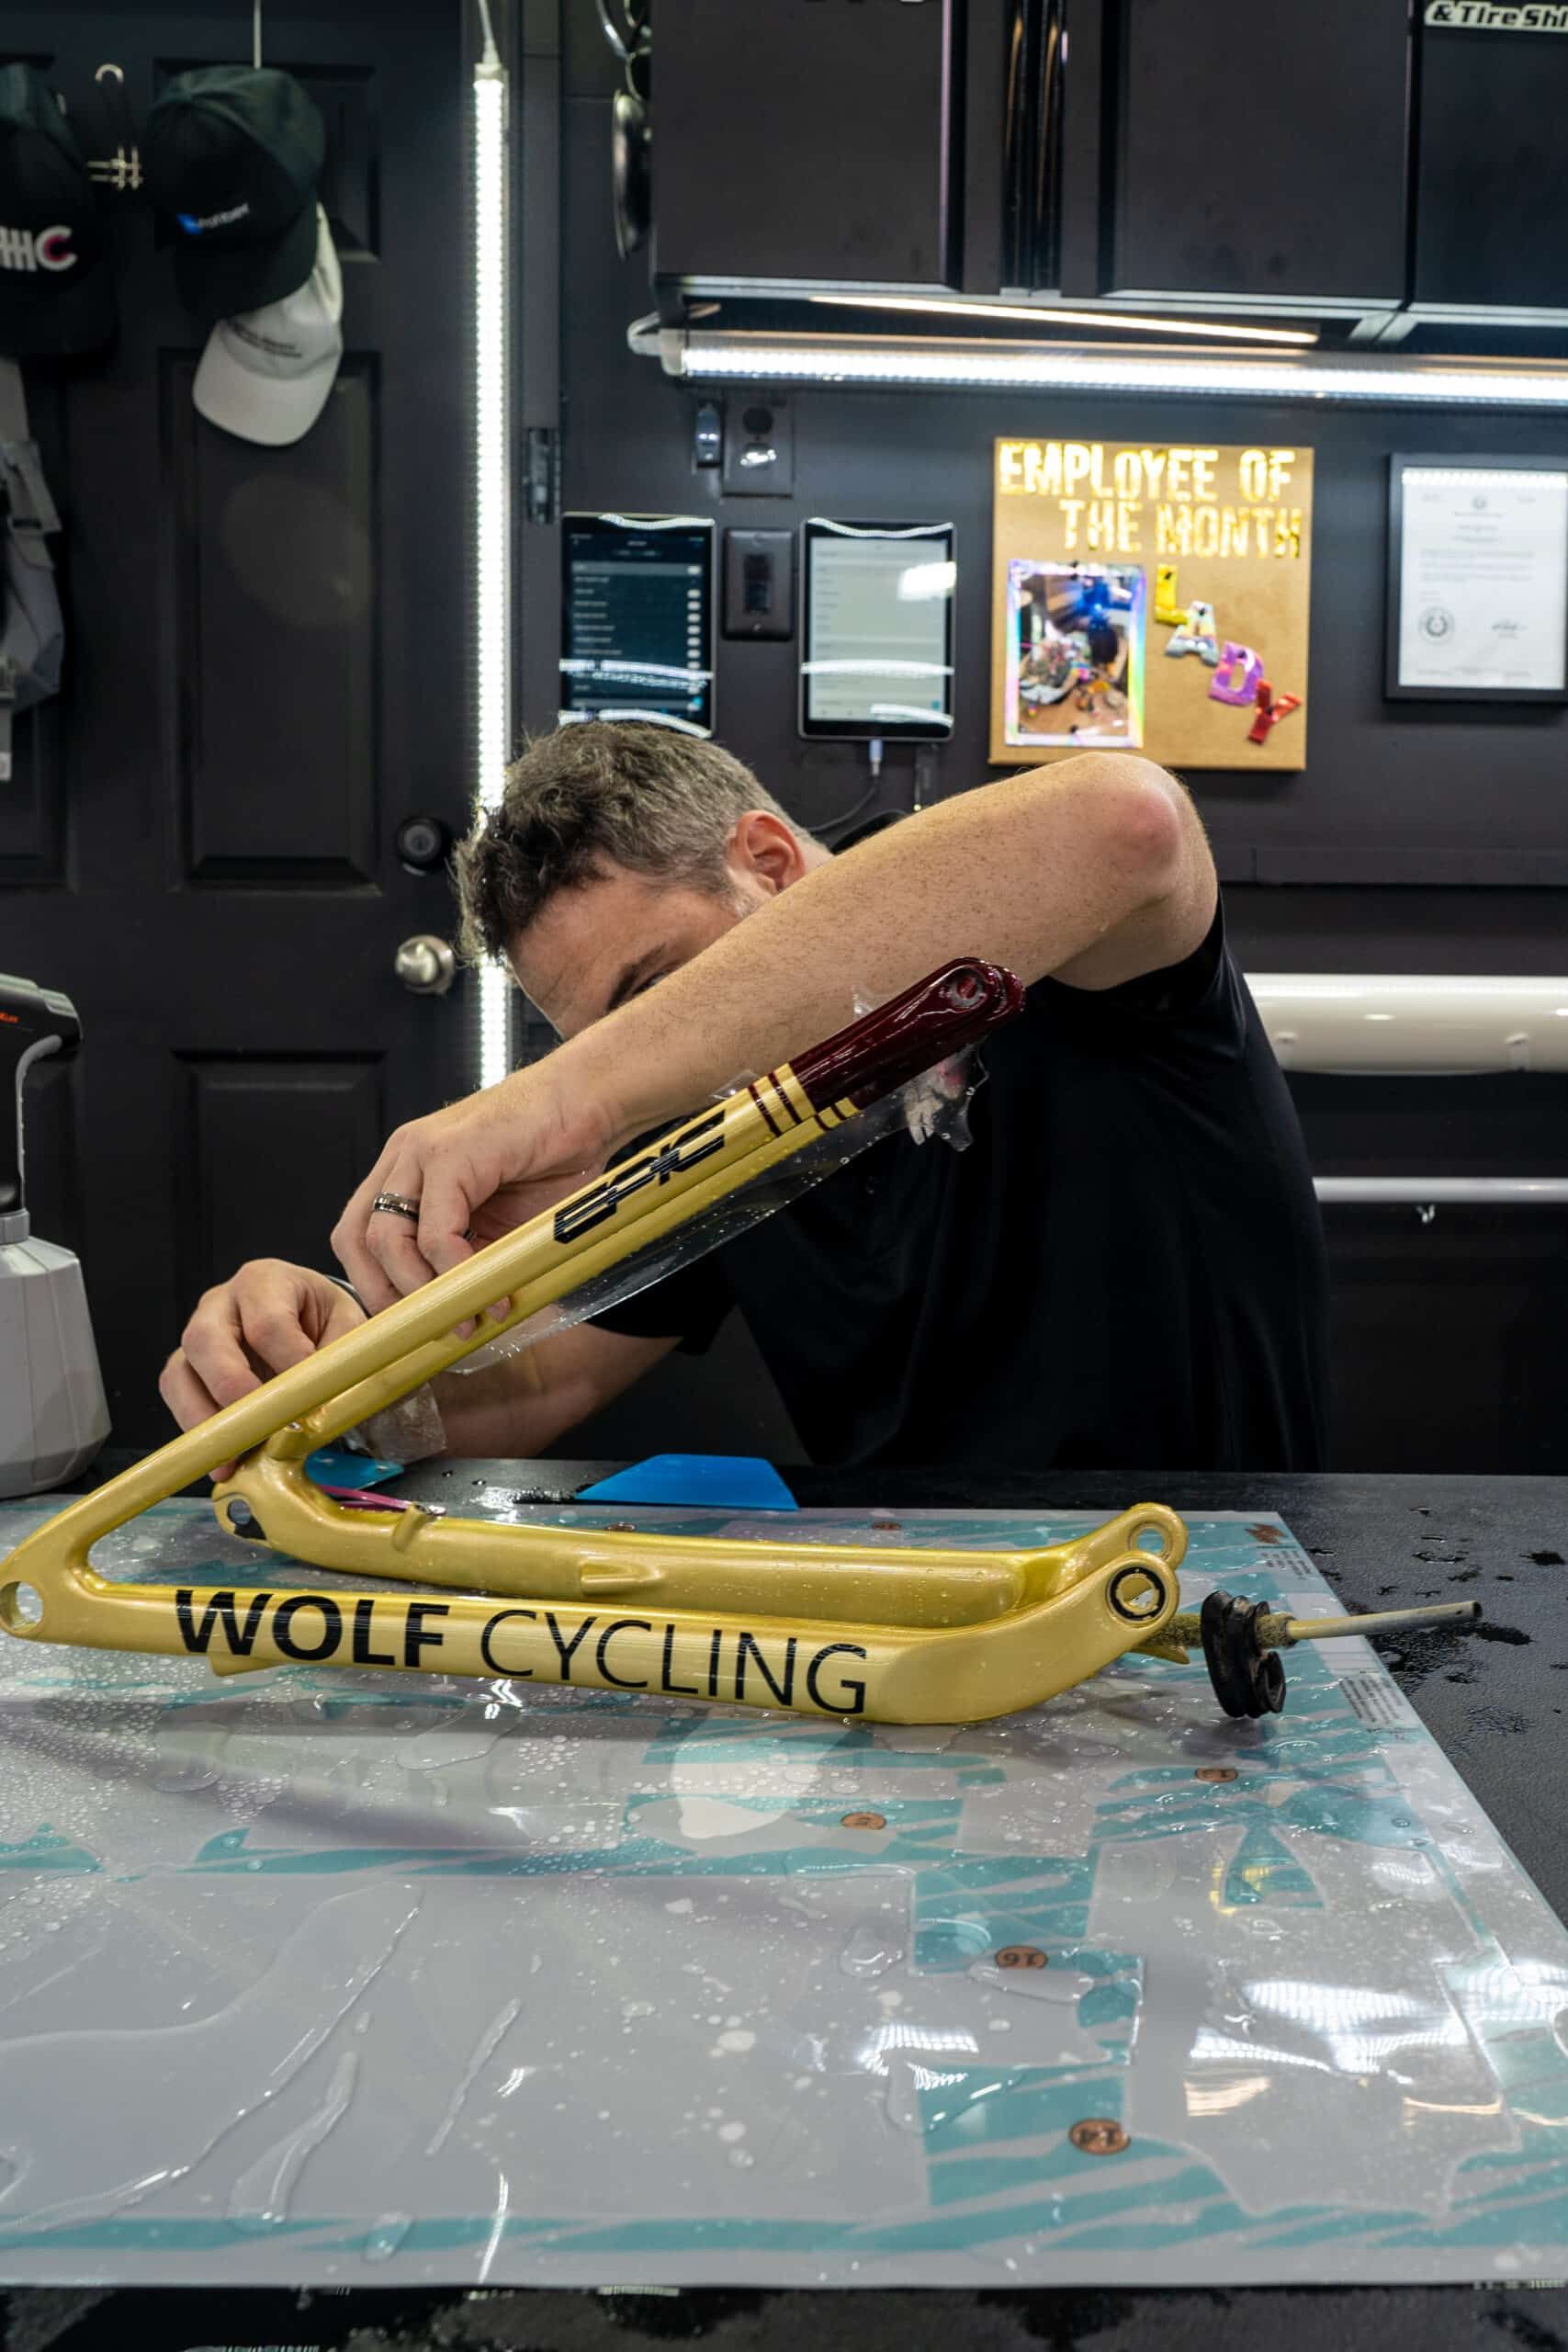 A man is working on a bicycle frame in a garage.